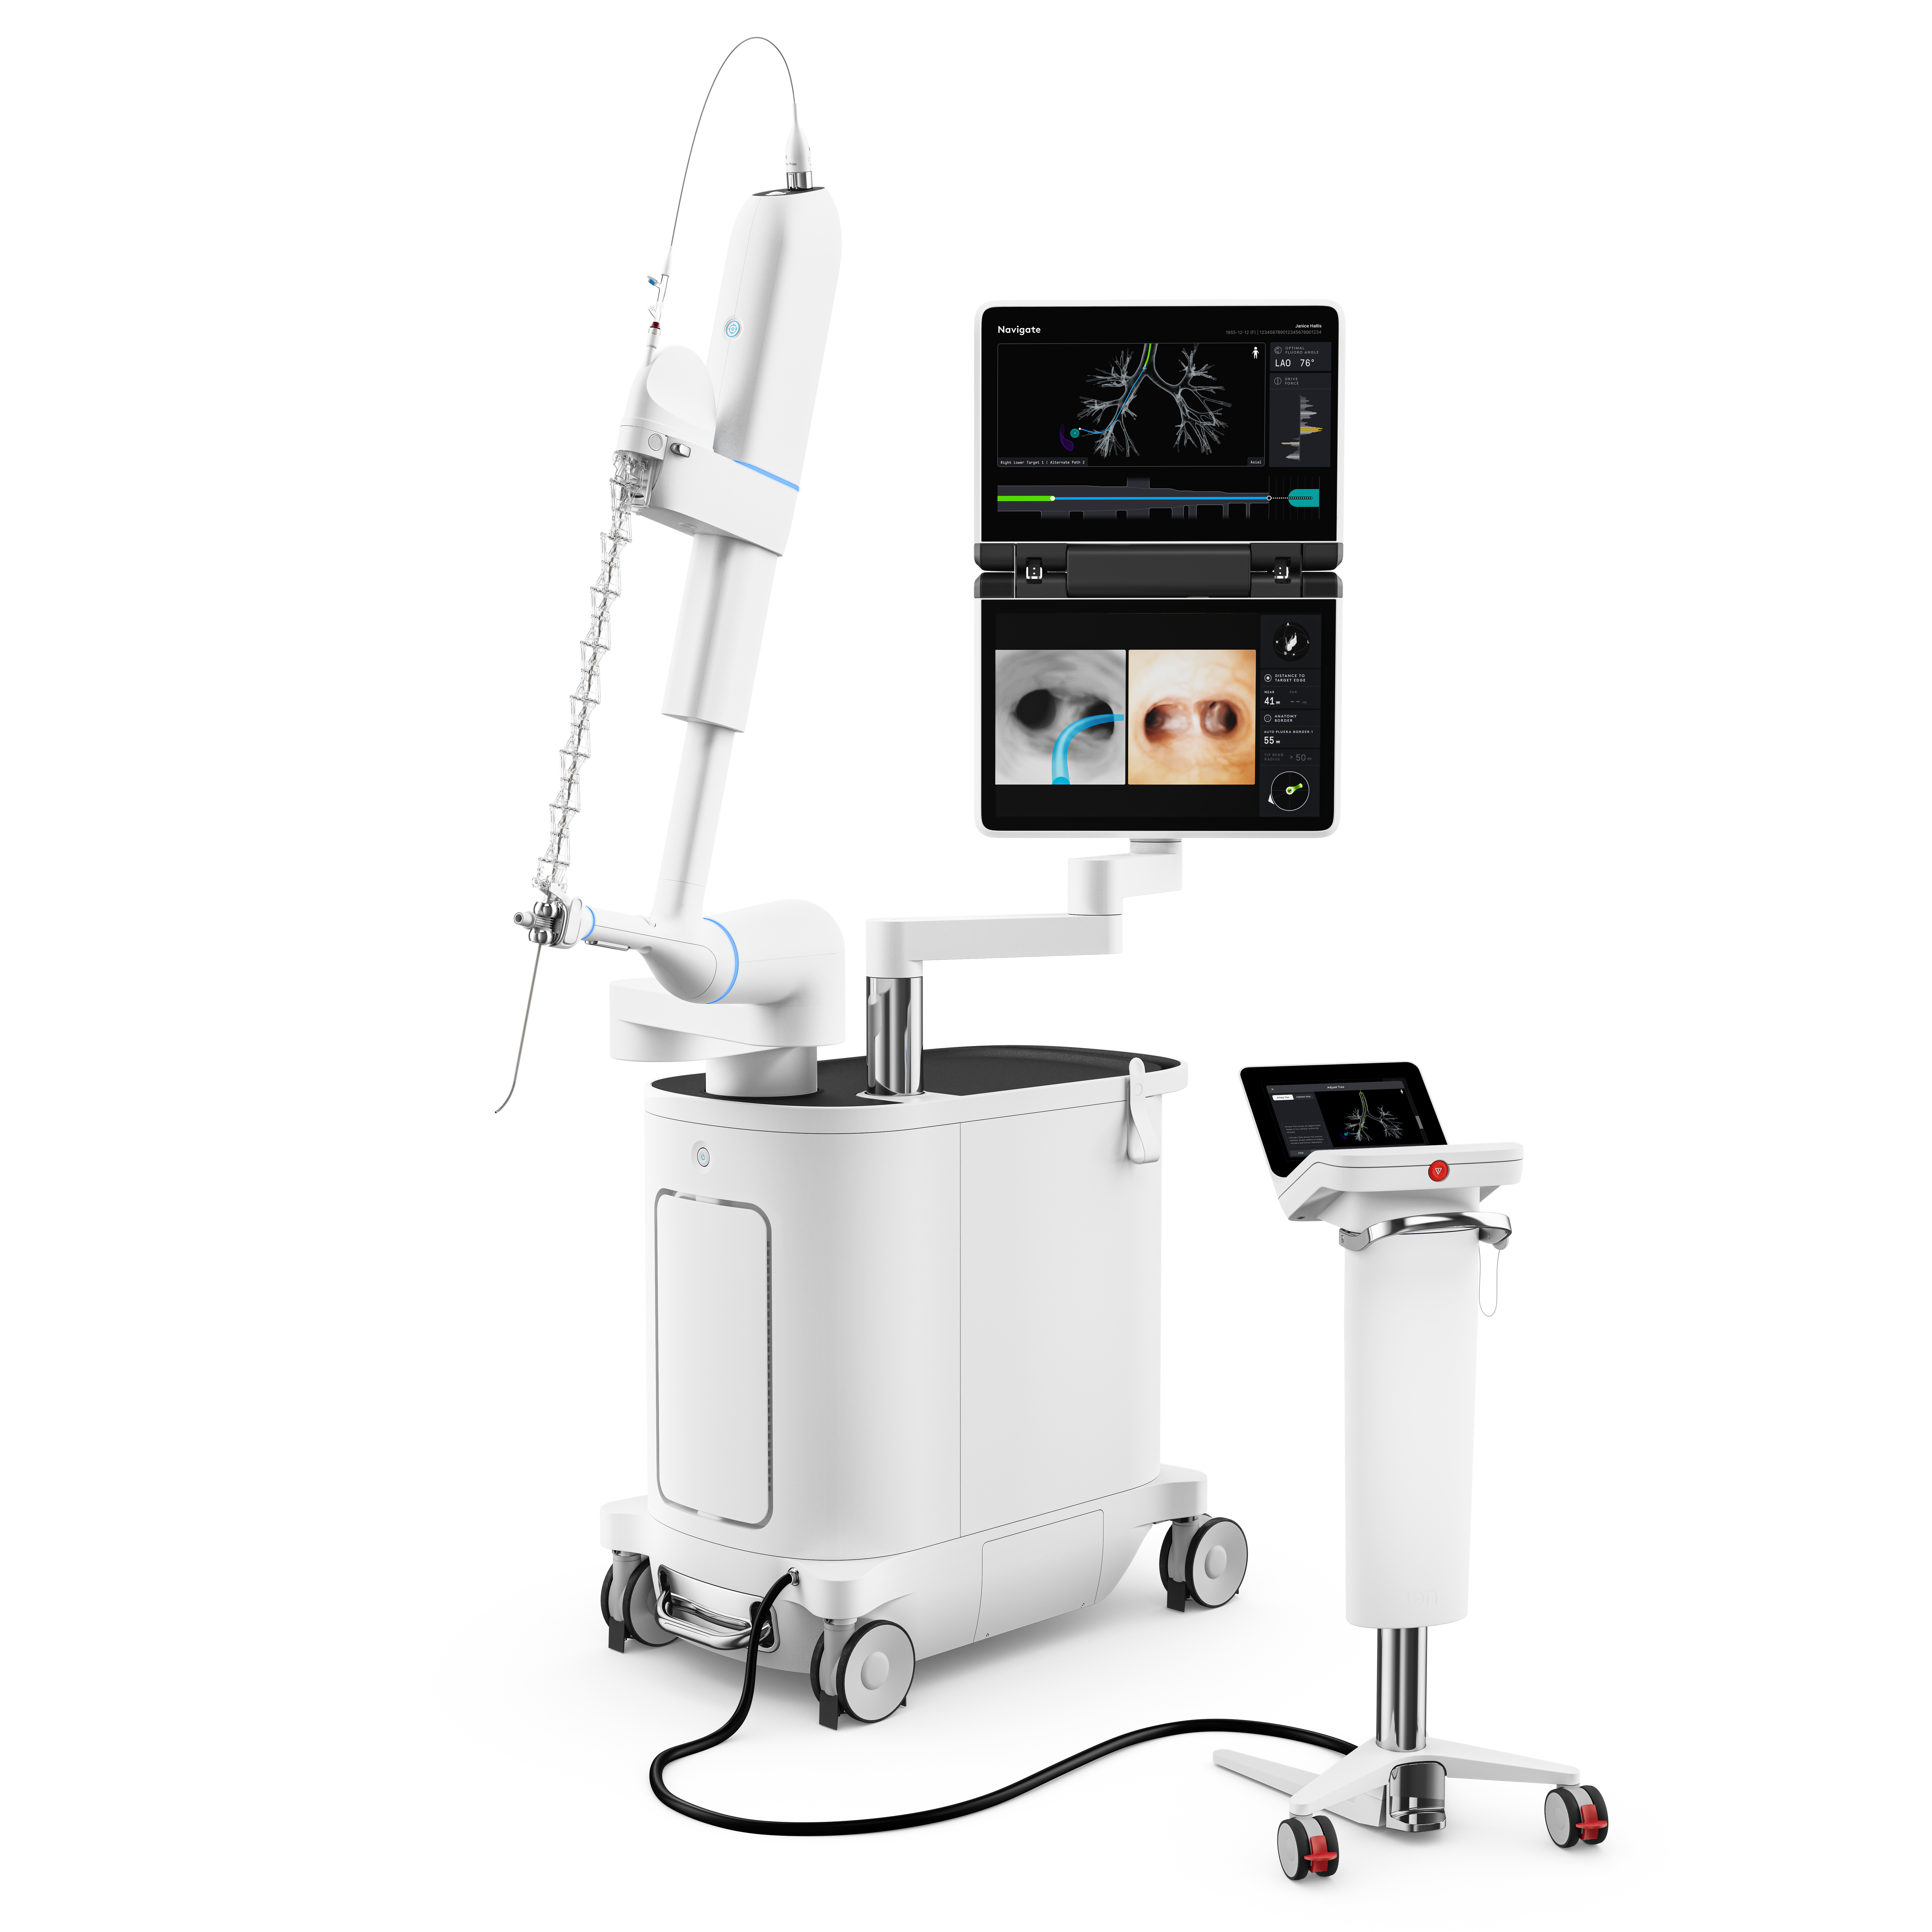 Ion, a robotic-assisted system for minimally invasive biopsies, is an advanced way to navigate through the airways and bronchial tree for precise biopsy samples.